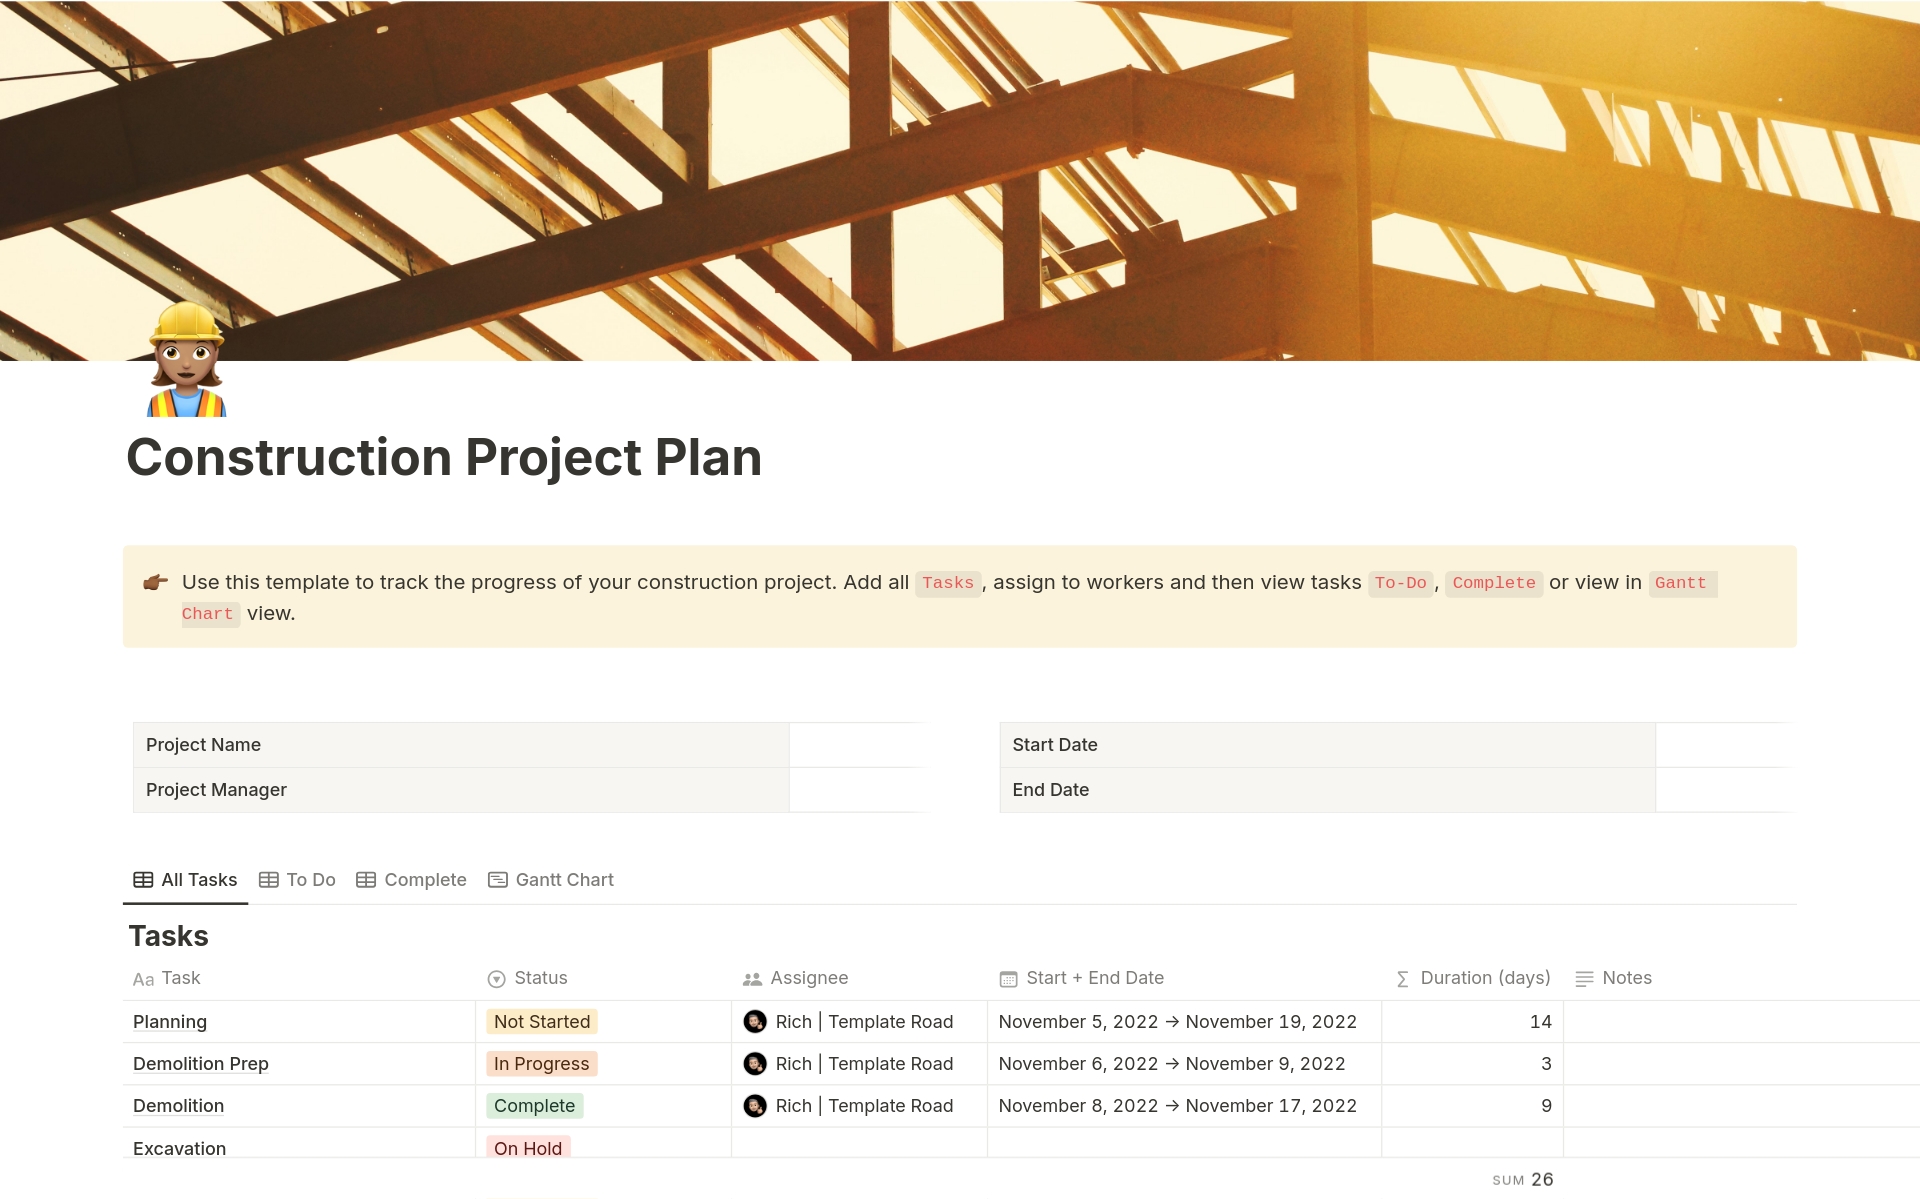 Use this template to track the progress of your construction project in Notion.